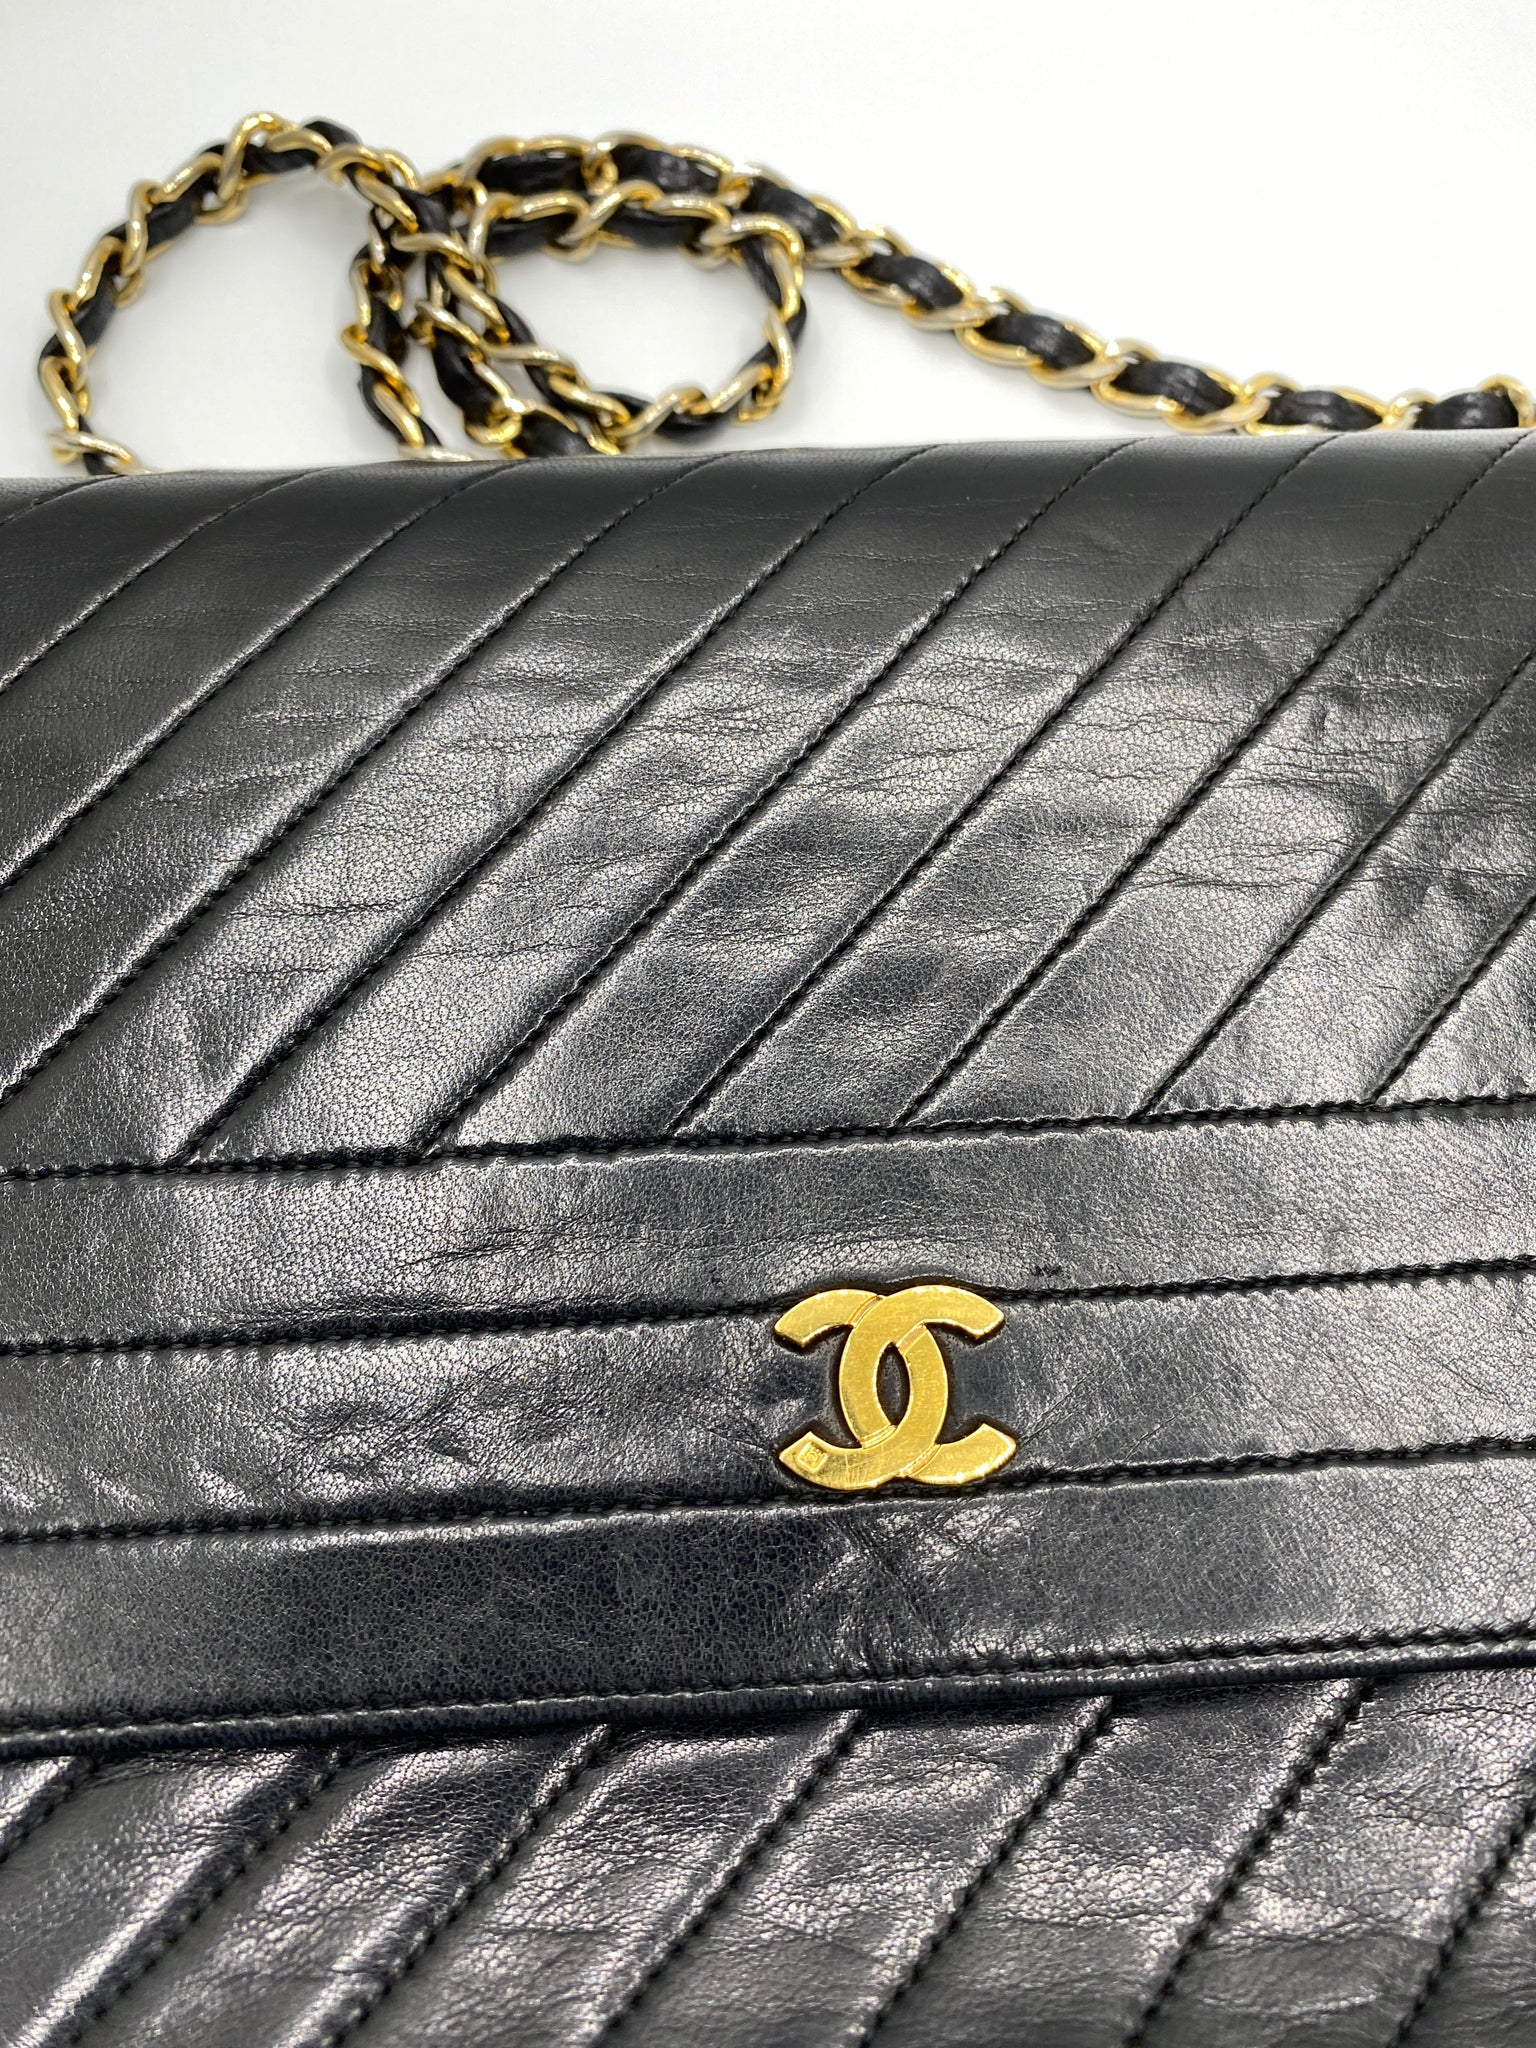 Chanel Diagonal Quilted Flap Bag – CocoVintageBags